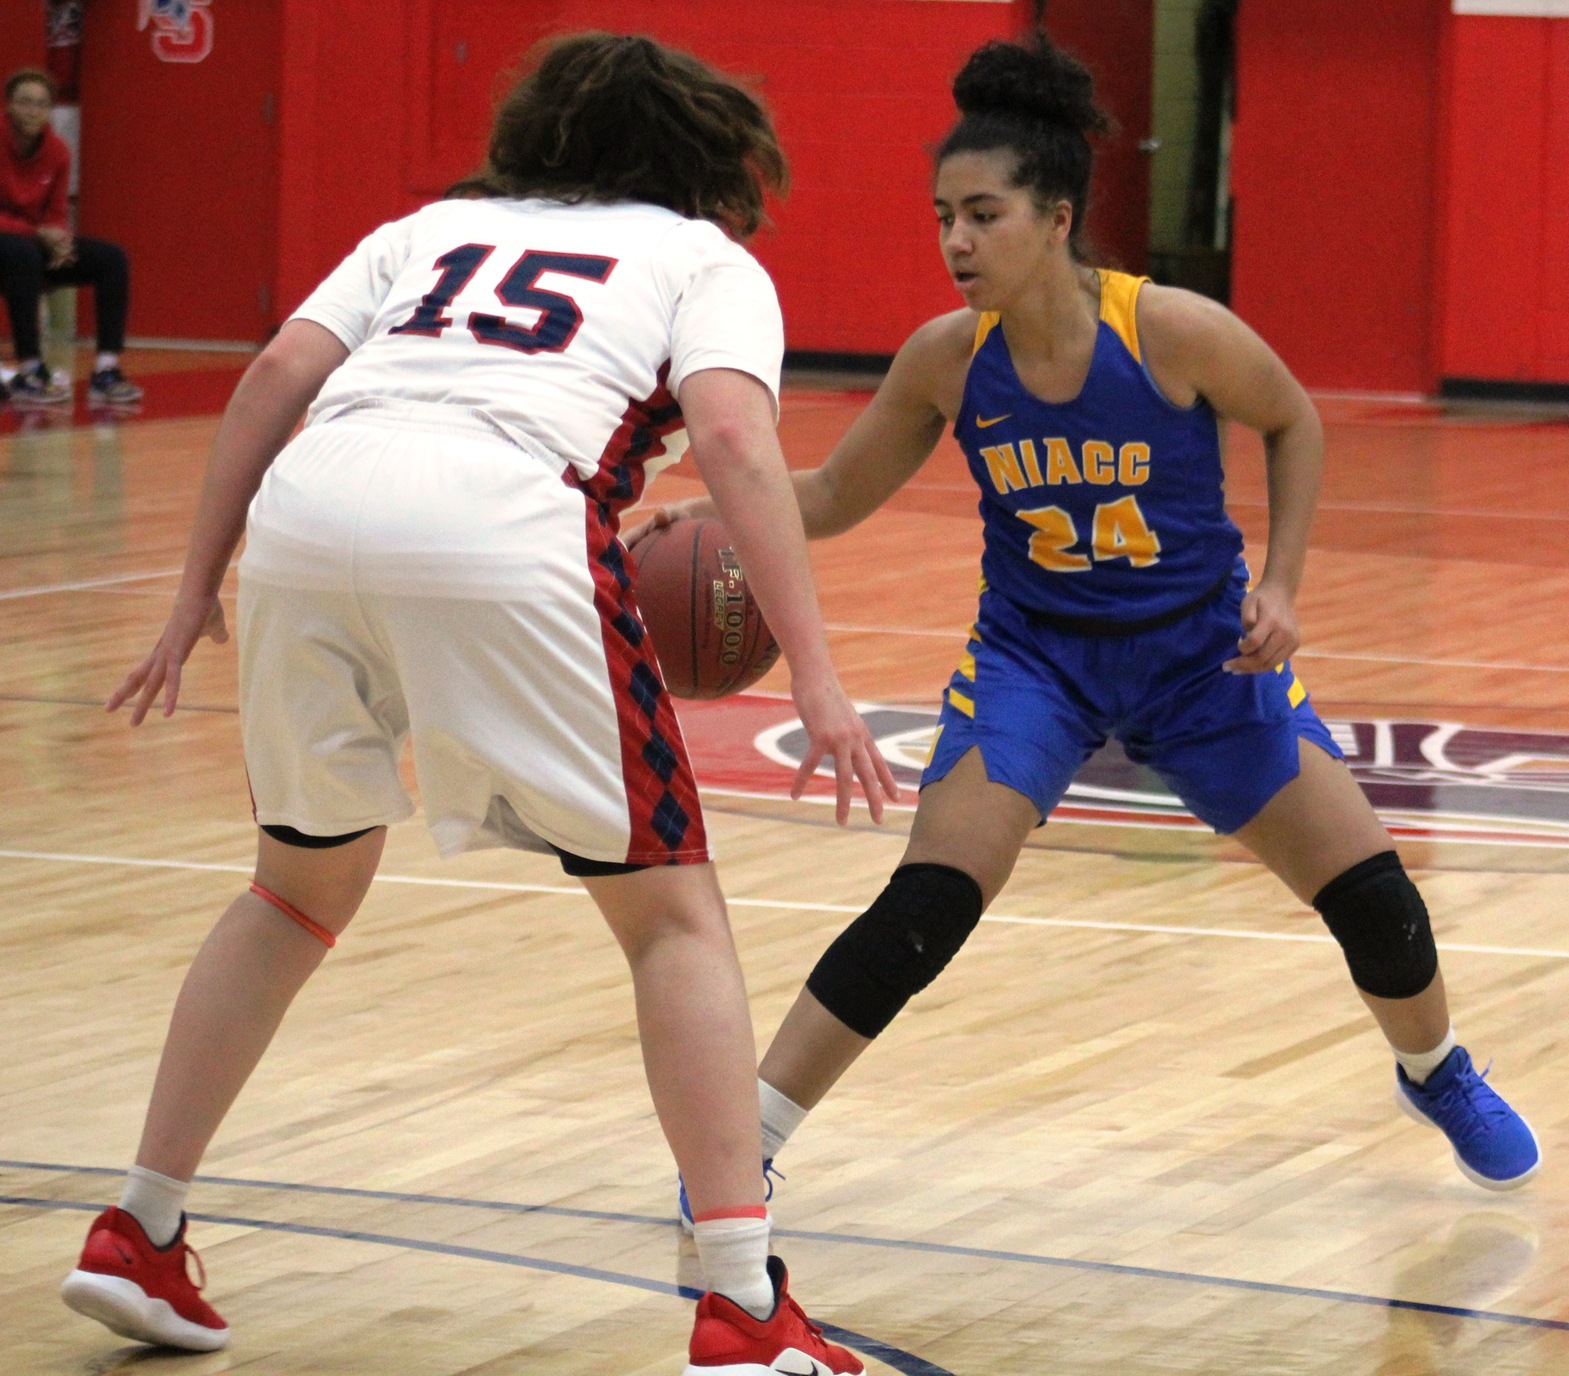 NIACC's Tahya Campbell looks to drive to the basket in Saturday's game against Southwestern.